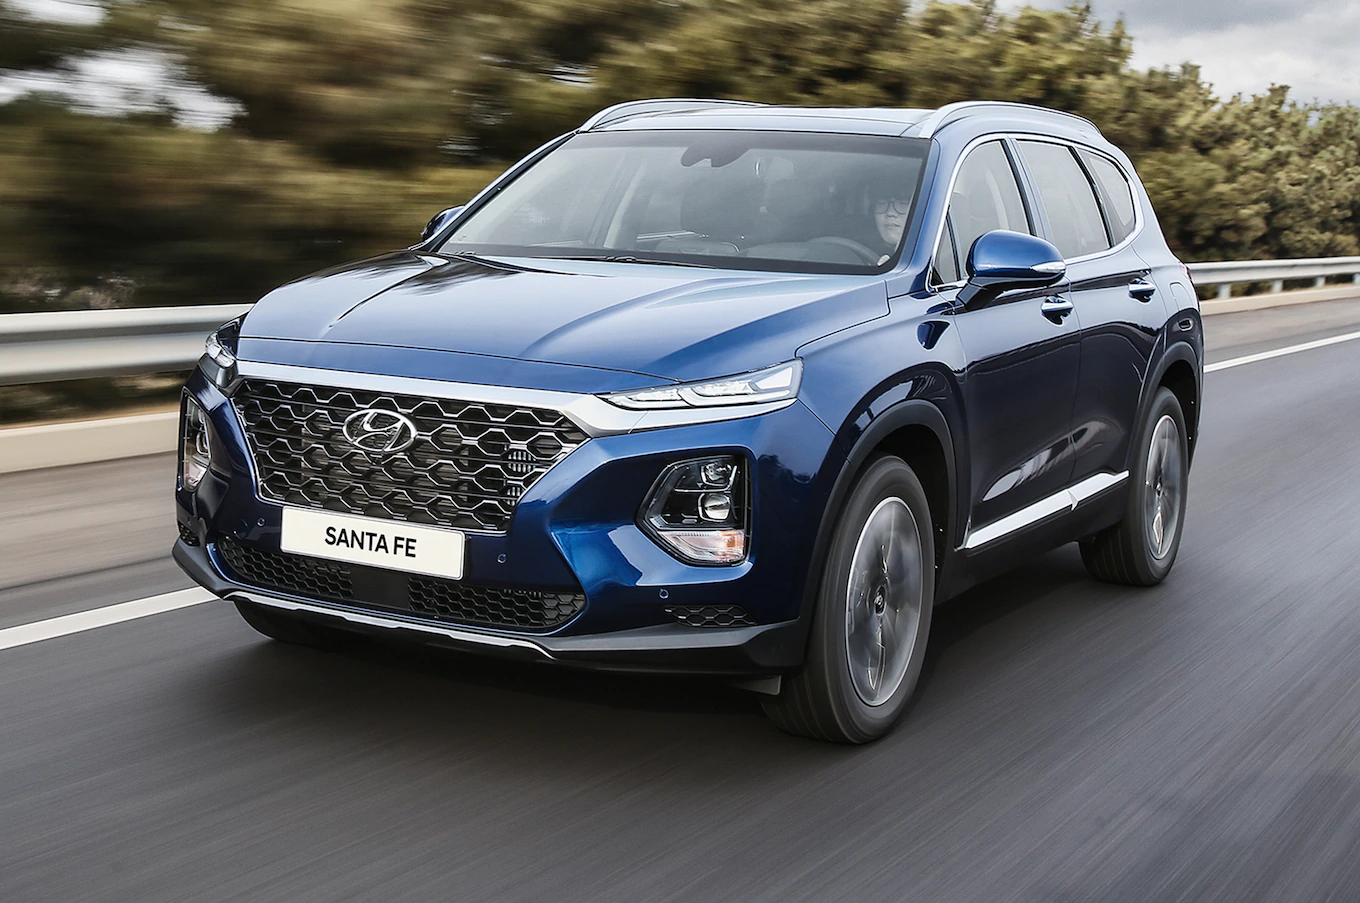 Hyundai Santa Fe 2019: Filled with advanced features & Excellent ride comfort